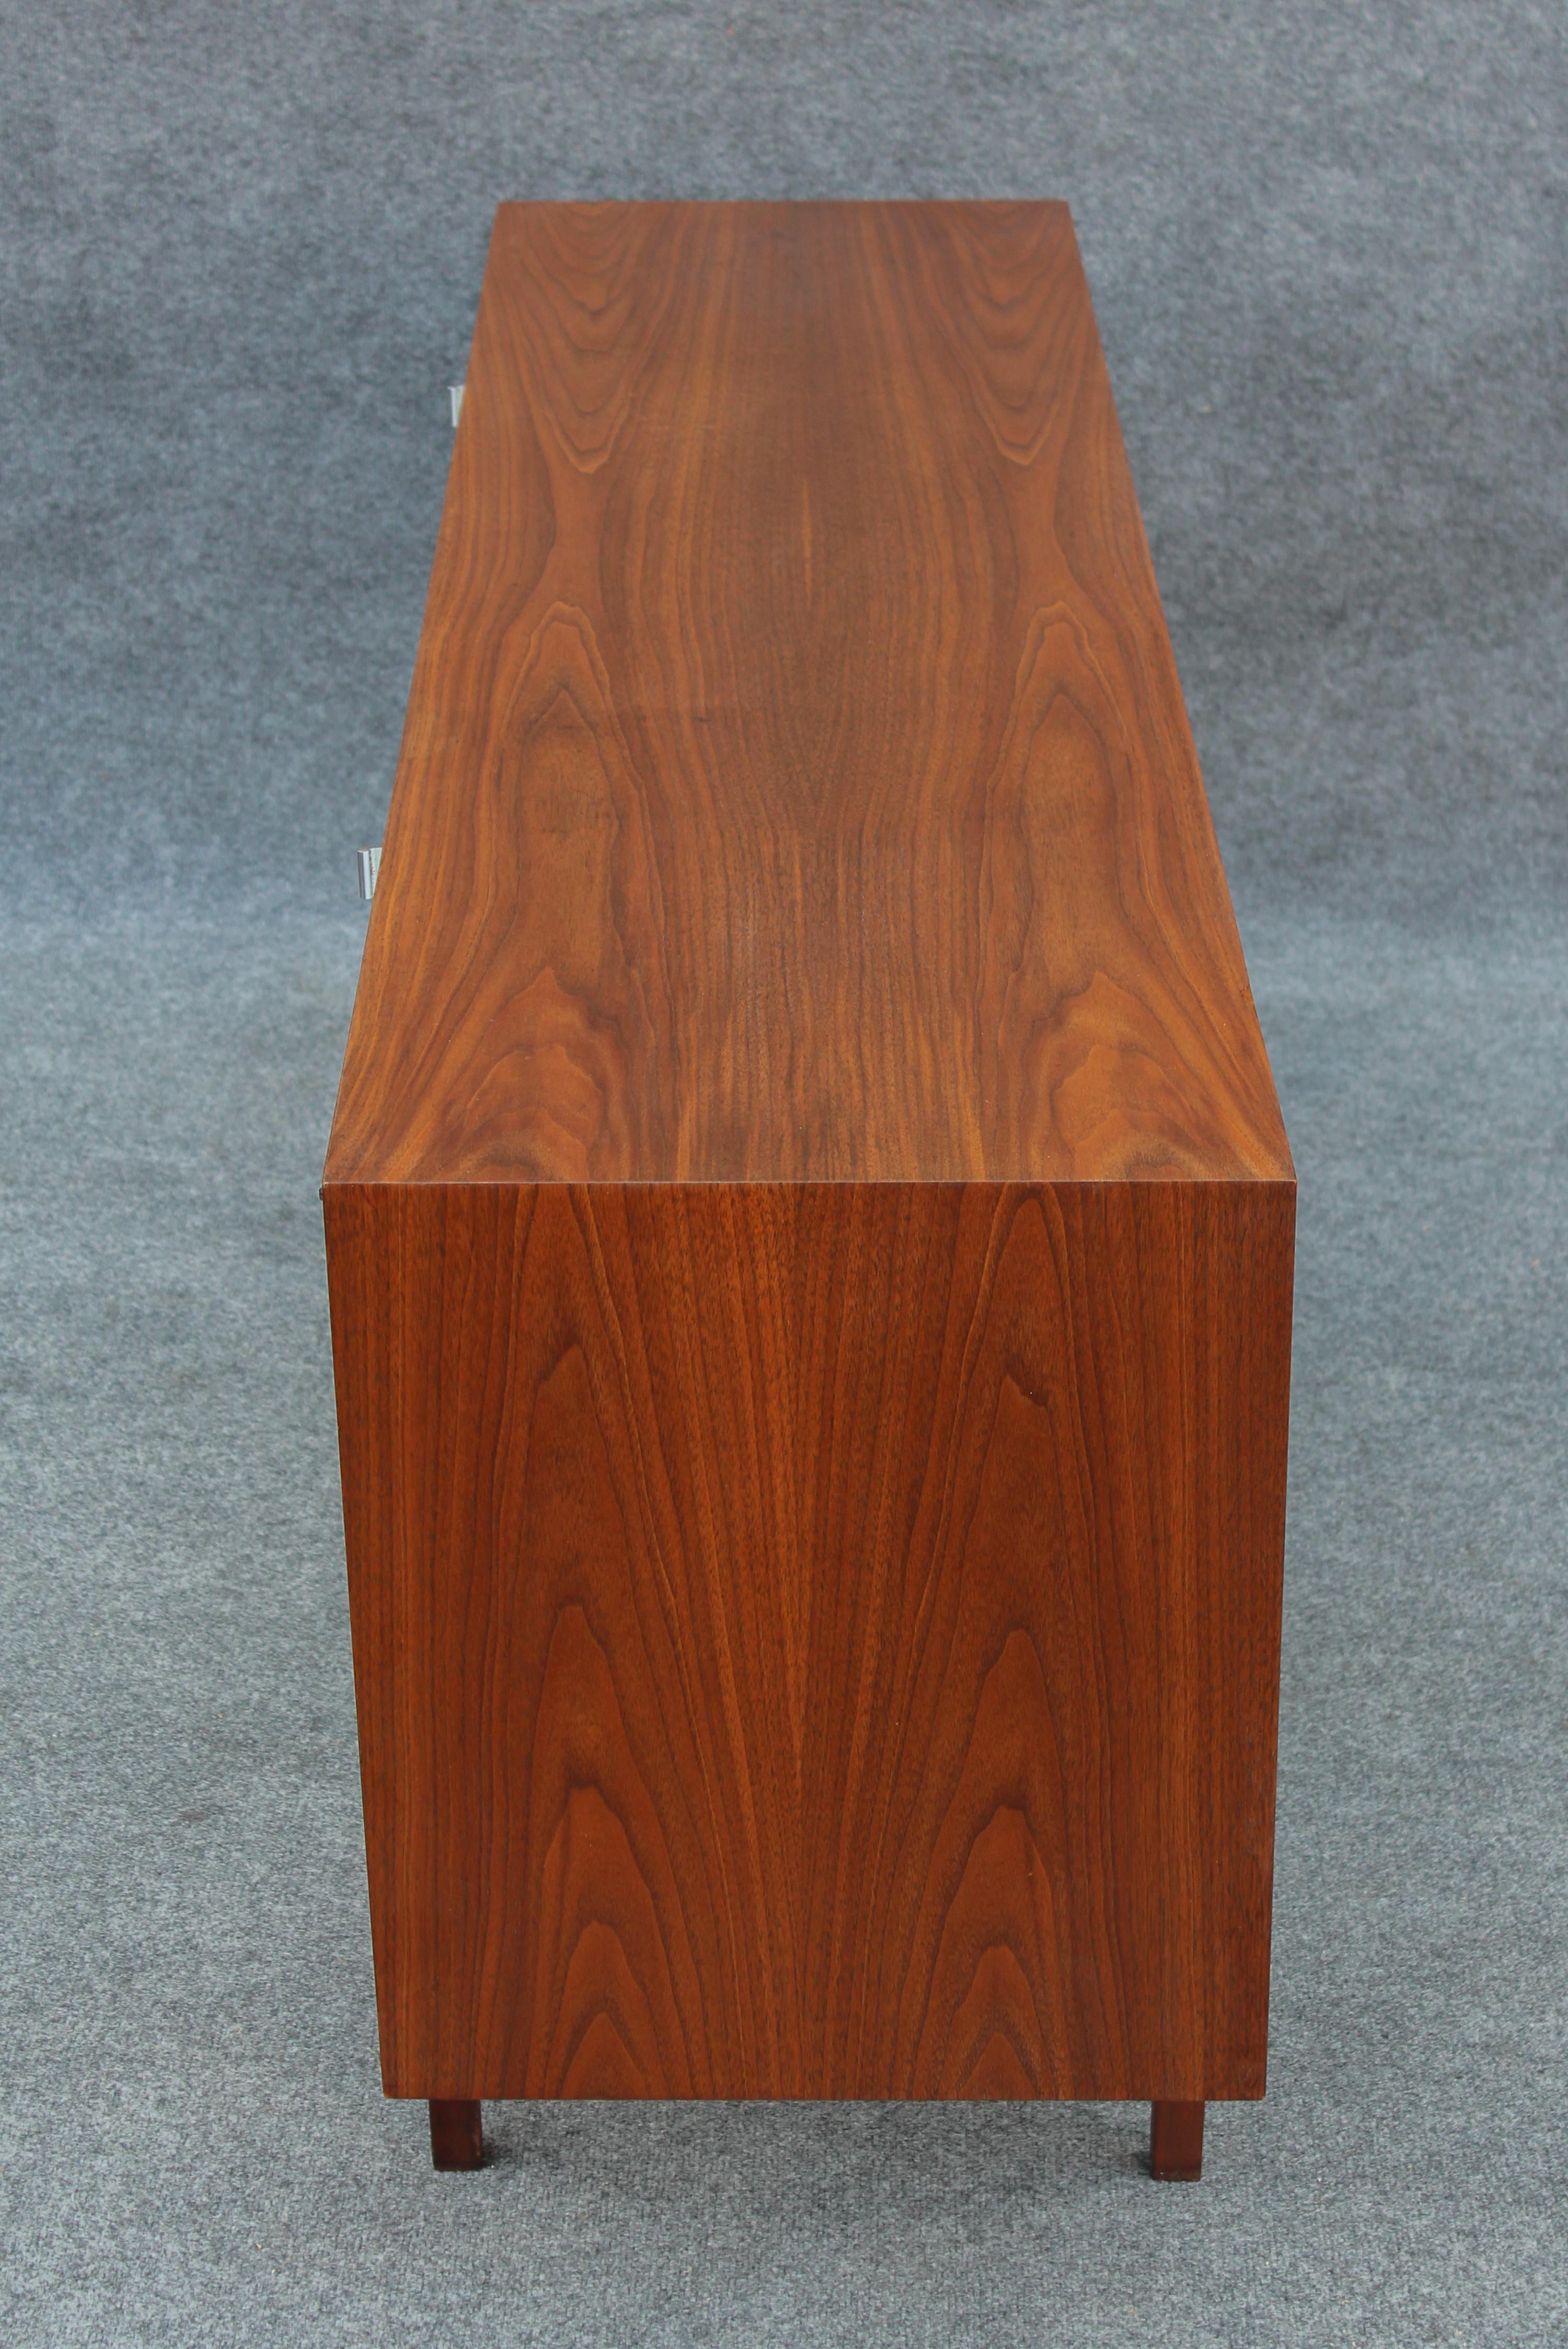 Restored Florence Knoll Walnut & Maple Cabinet Model No.541 New York, 1960s For Sale 2